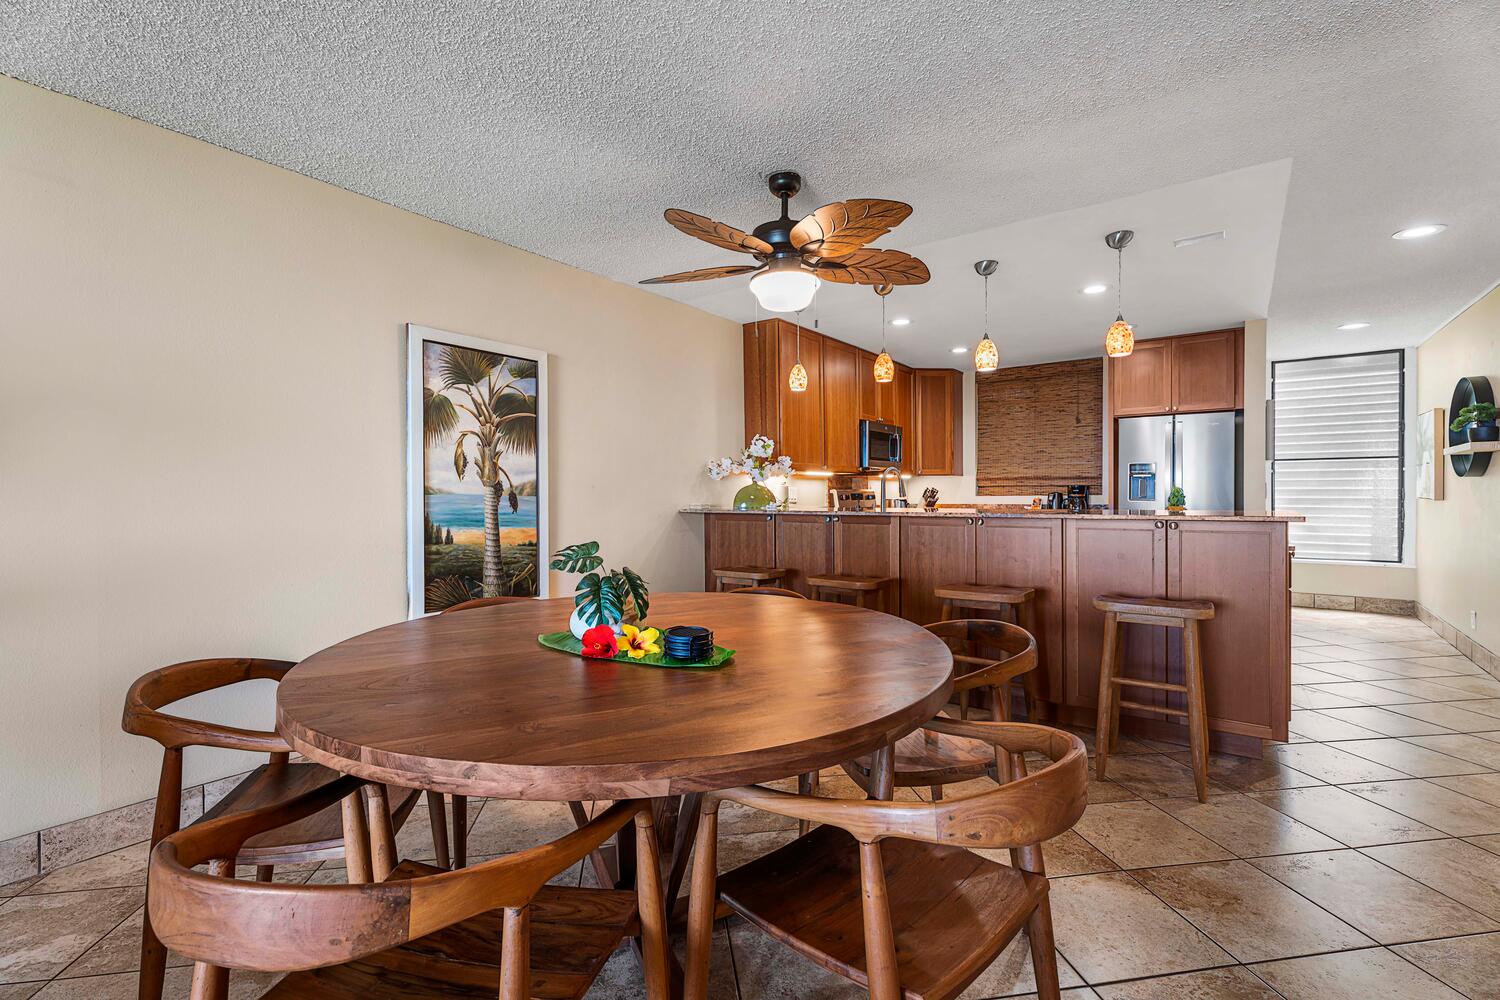 Kailua Kona Vacation Rentals, Keauhou Kona Surf & Racquet 1104 - Dining table with four seats, perfect for small families